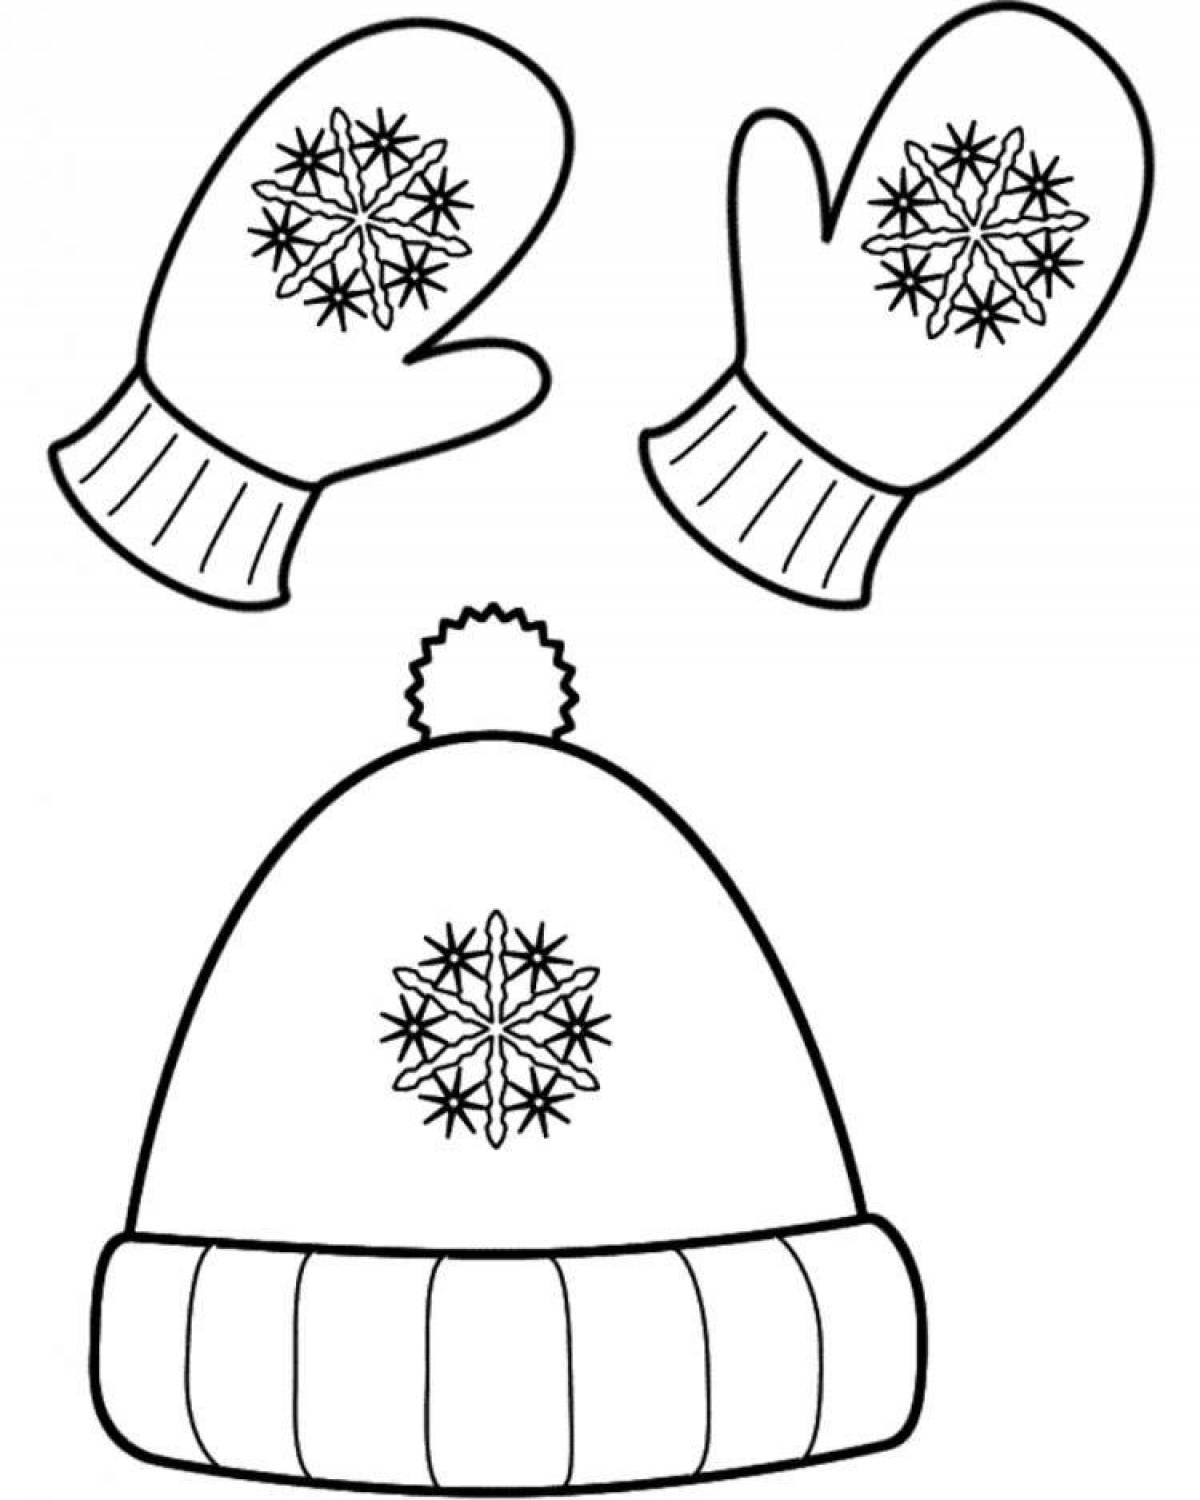 Hat and mittens #10